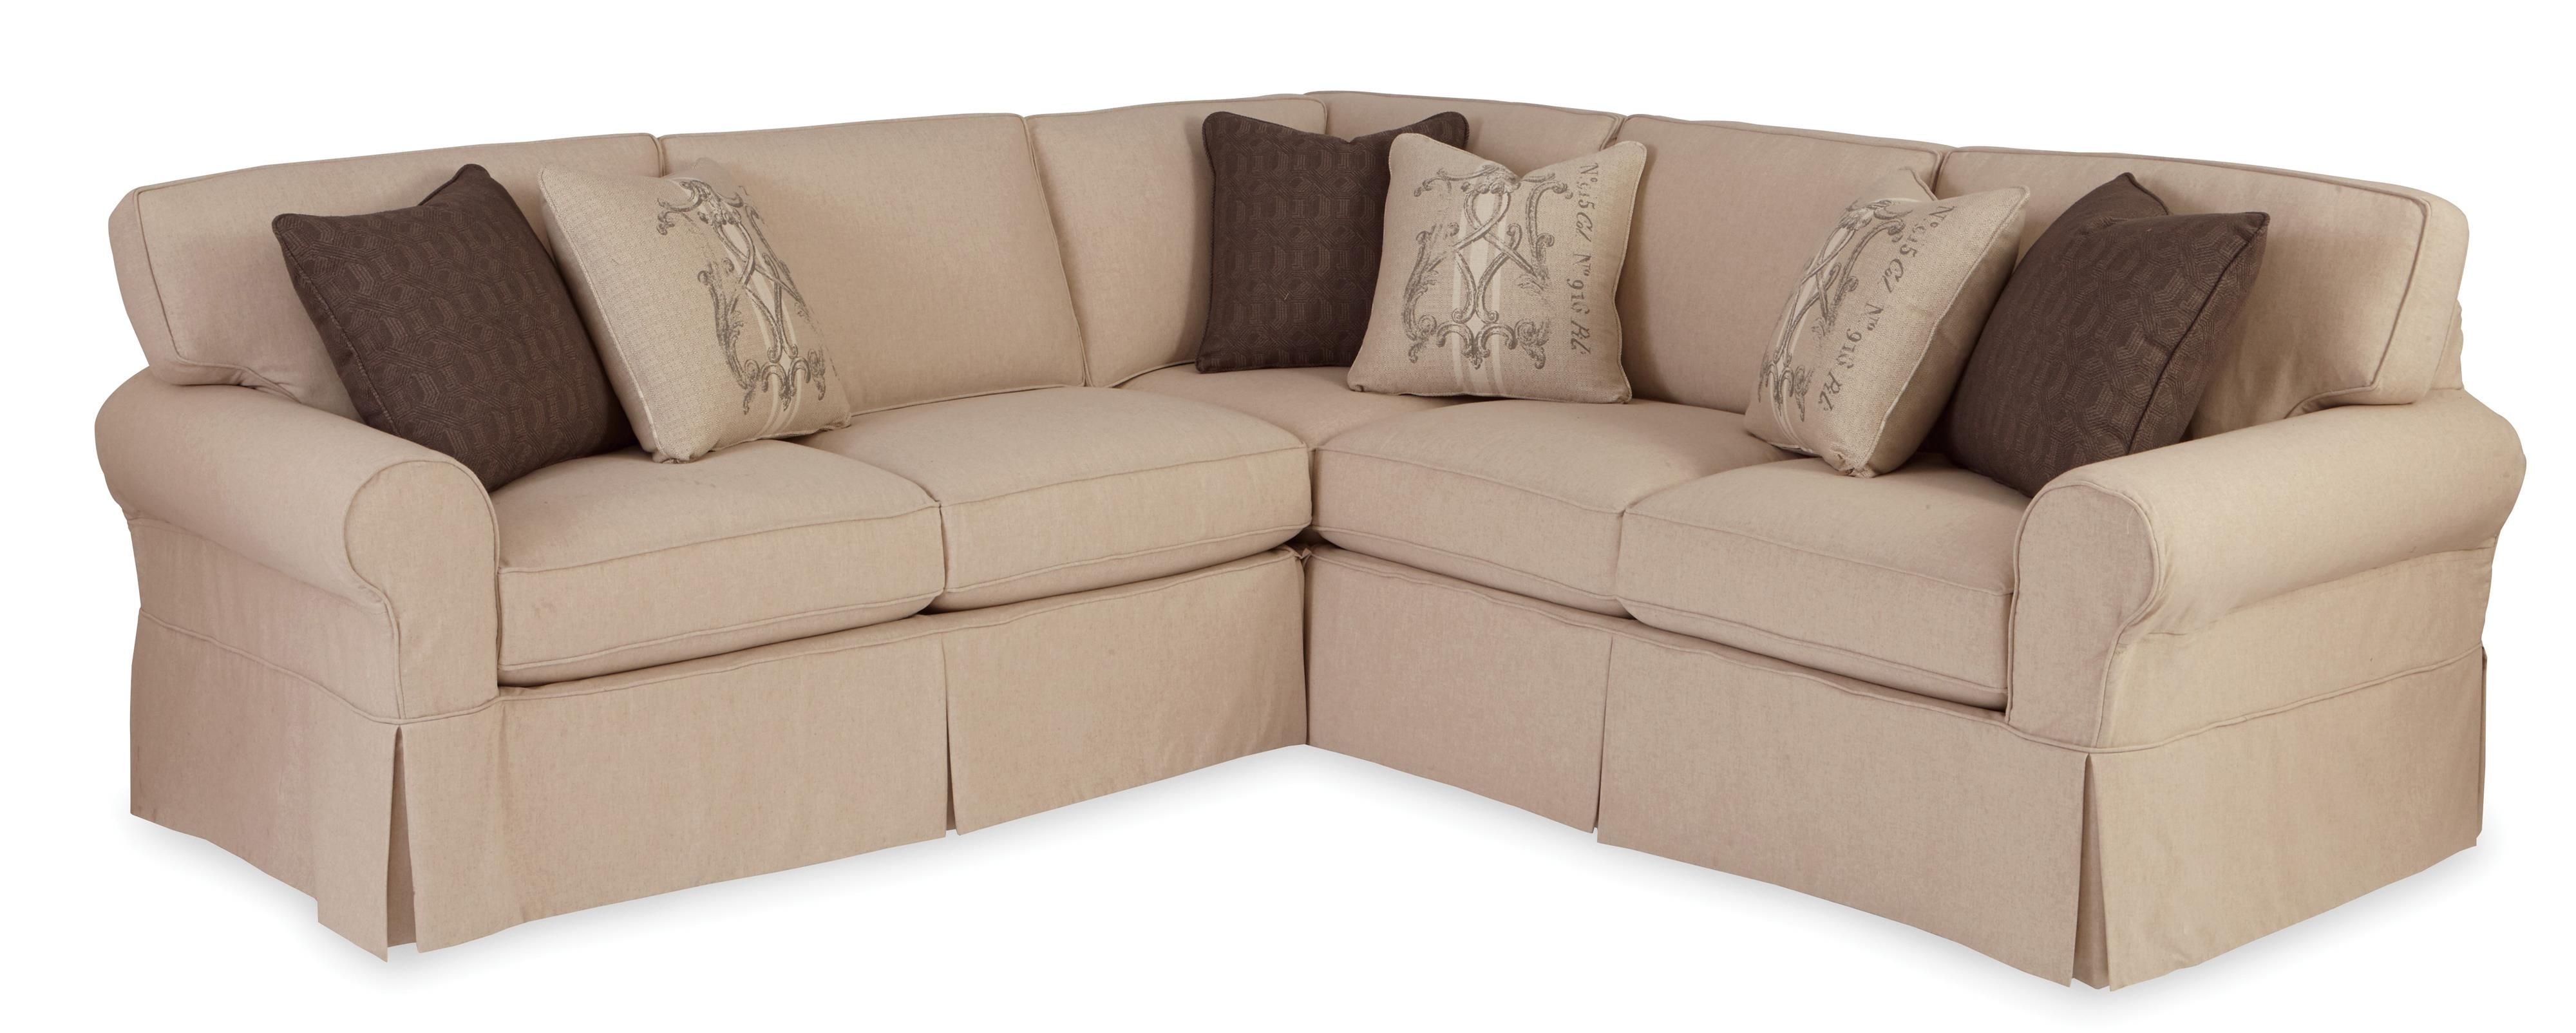 Sofas Center Sectional Diy Slipcover For Sofa With Chaisedys With Regard To Craftsman Sectional Sofa 